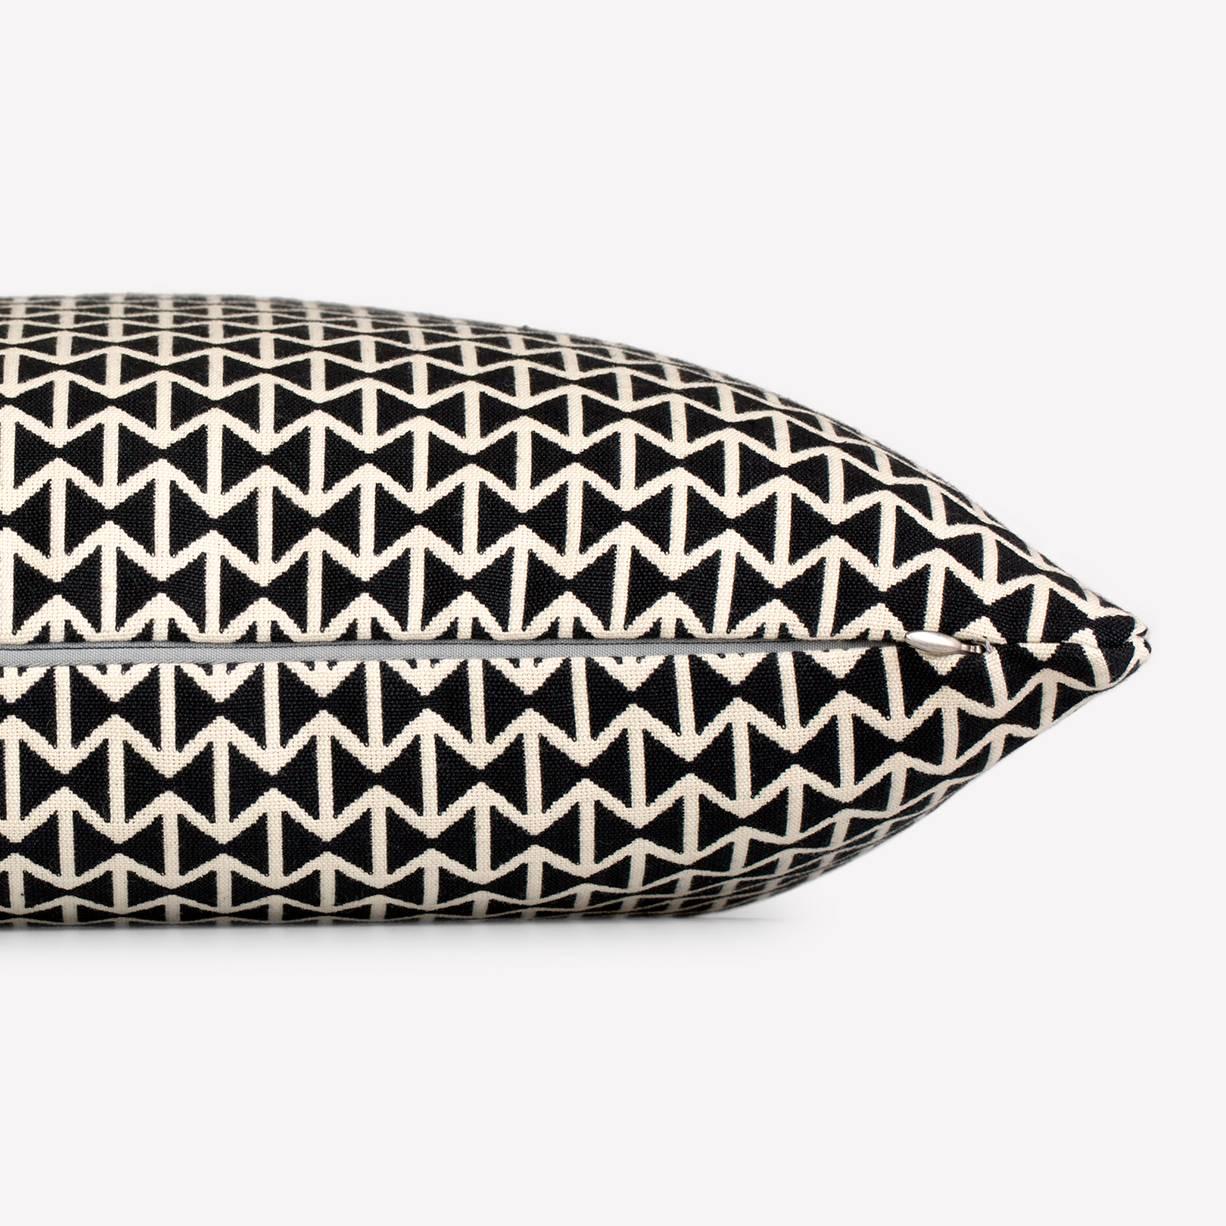 Maharam Pillow
Double Triangles by Alexander Girard 
001 Black/White

Designed by Alexander Girard in 1952 during his tenure as founding director of the Herman Miller Textile Division, Double Triangles features repeating ribbons of black and white